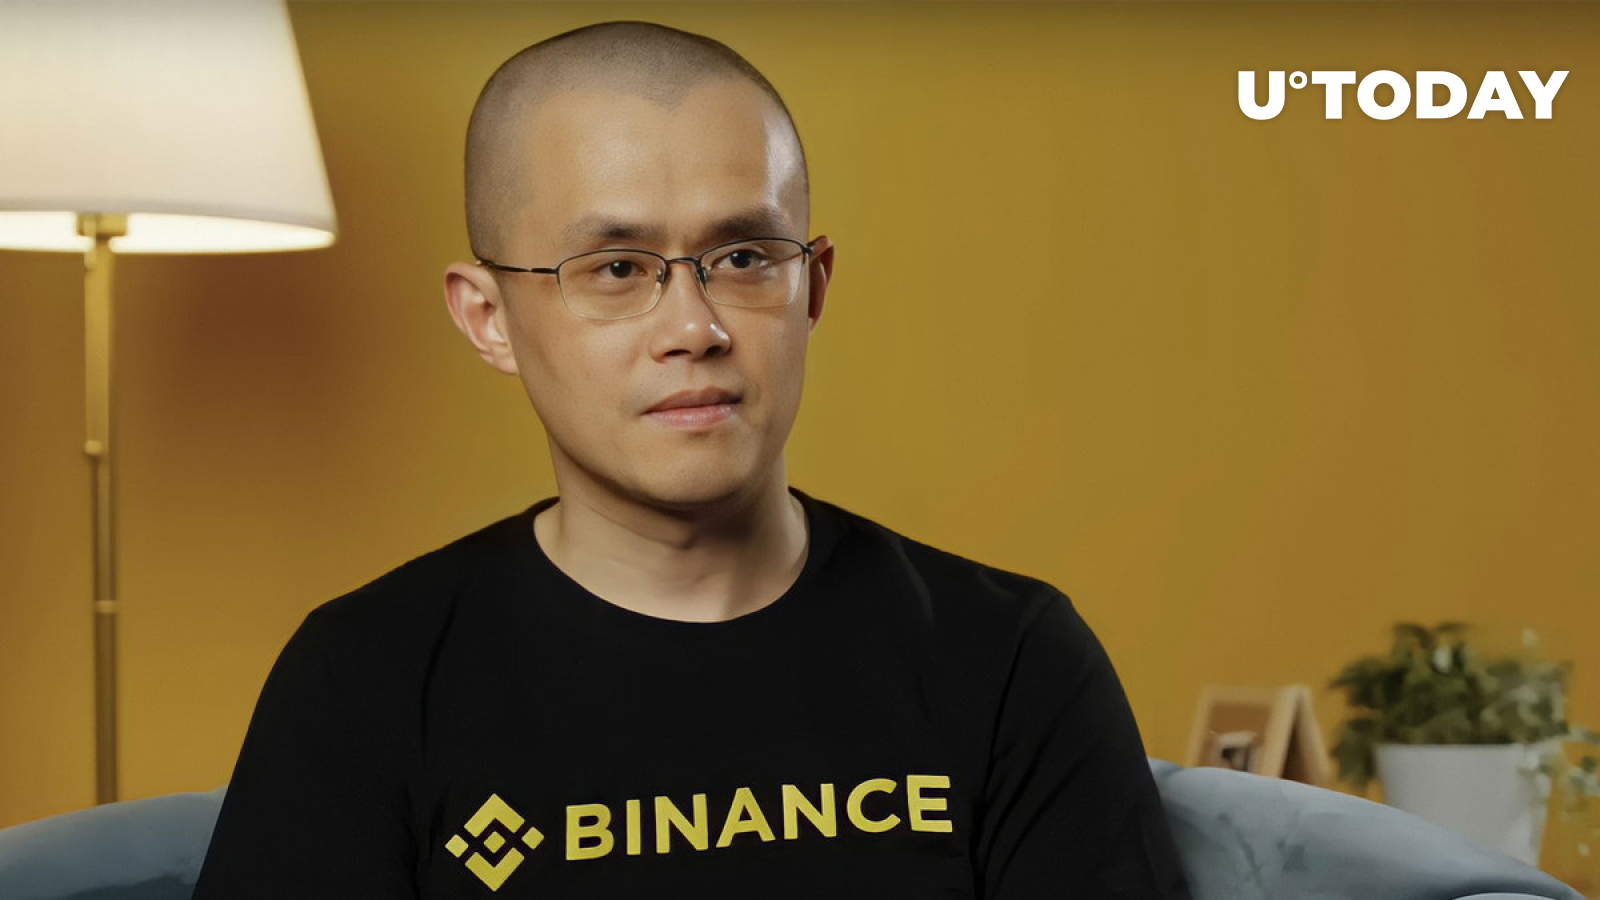 attack-of-cz-clones-binance-ceo-demands-twitter-to-remove-them-in-elon-musk-s-name